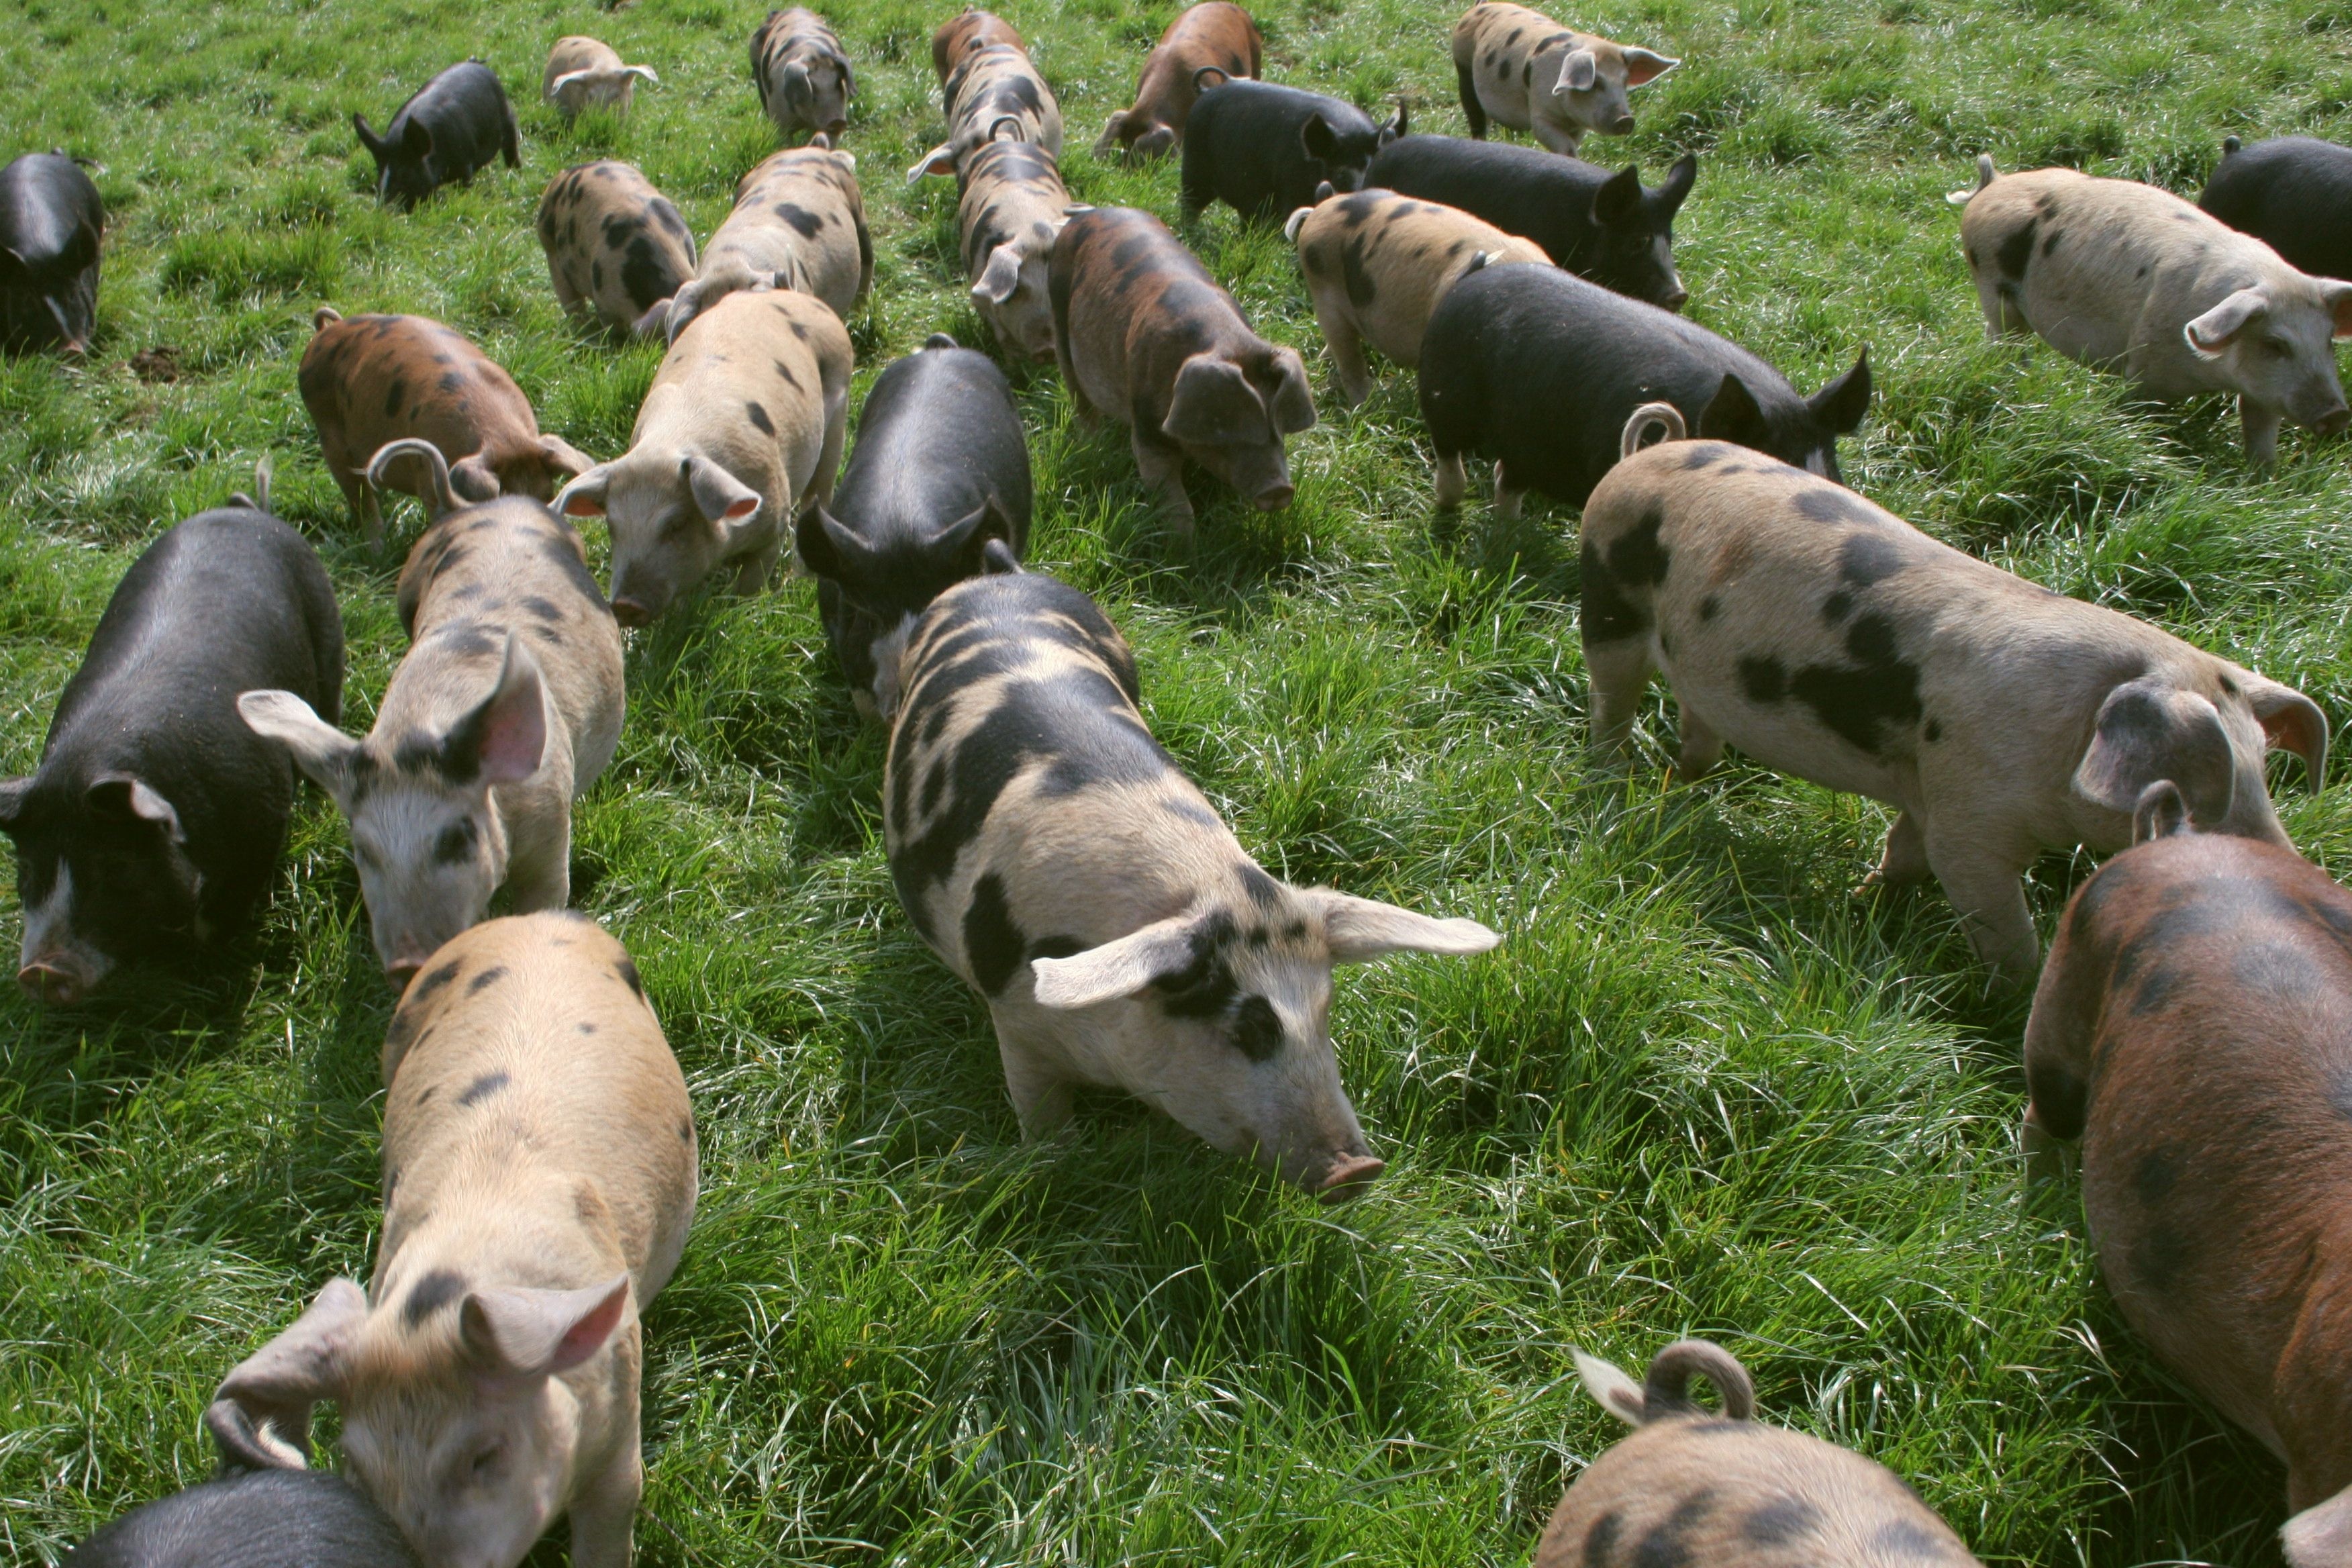 outdoor raised pigs in a pasture